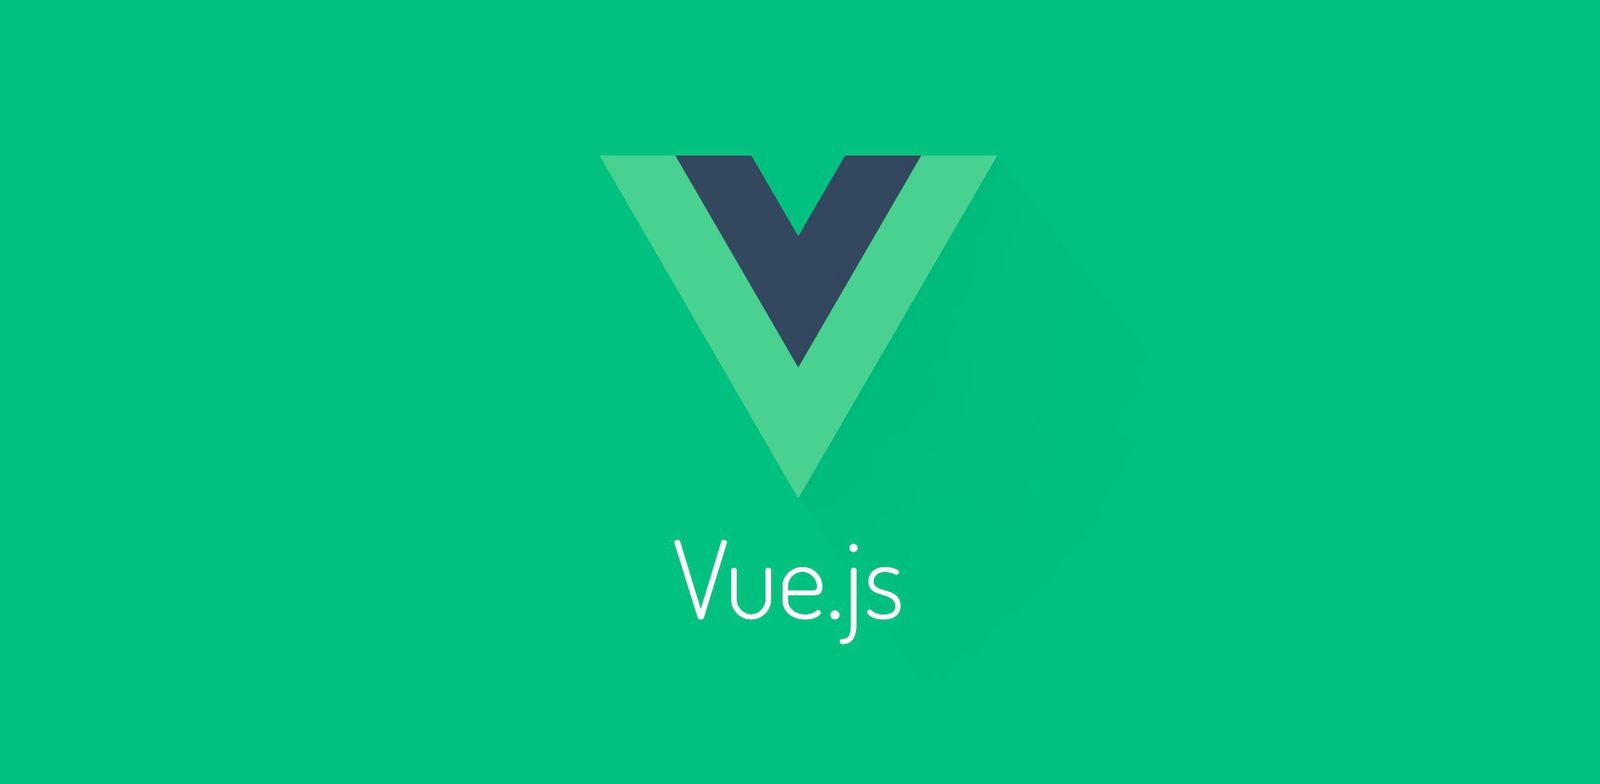 Easy to use sliders and phone inputs we can use in Vue apps